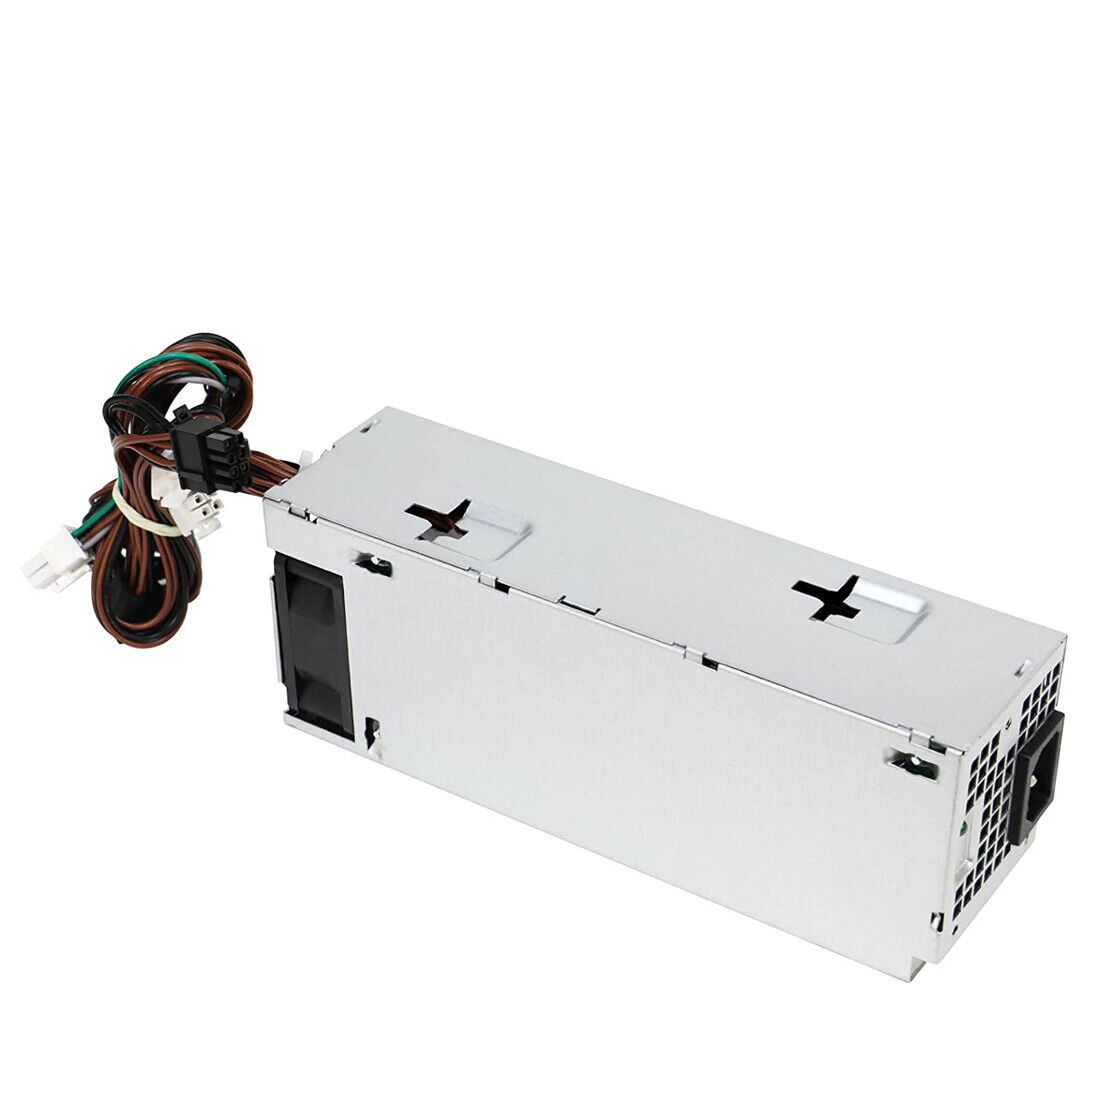 New 500W Power Supply For Dell Optiplex 7080MT 7070MT D500EPM-00 DPS-500AB-49A